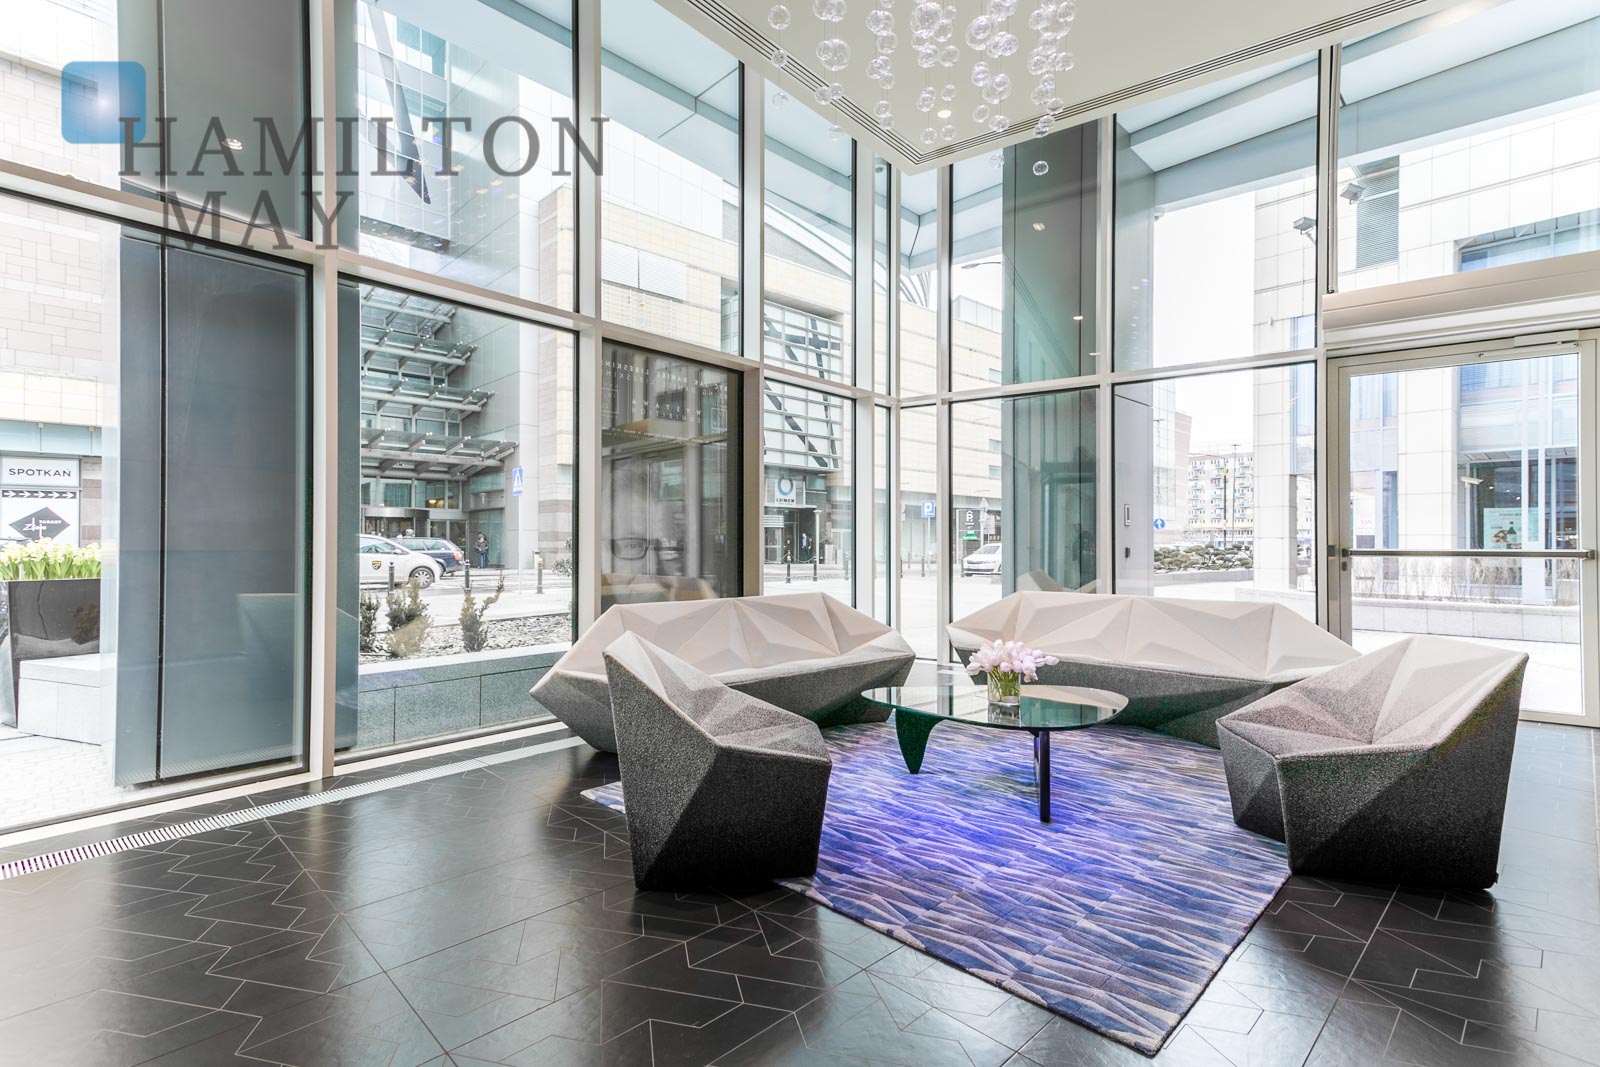 Złota 44 - a highly luxurious residential tower located in the heart of Warsaws business district